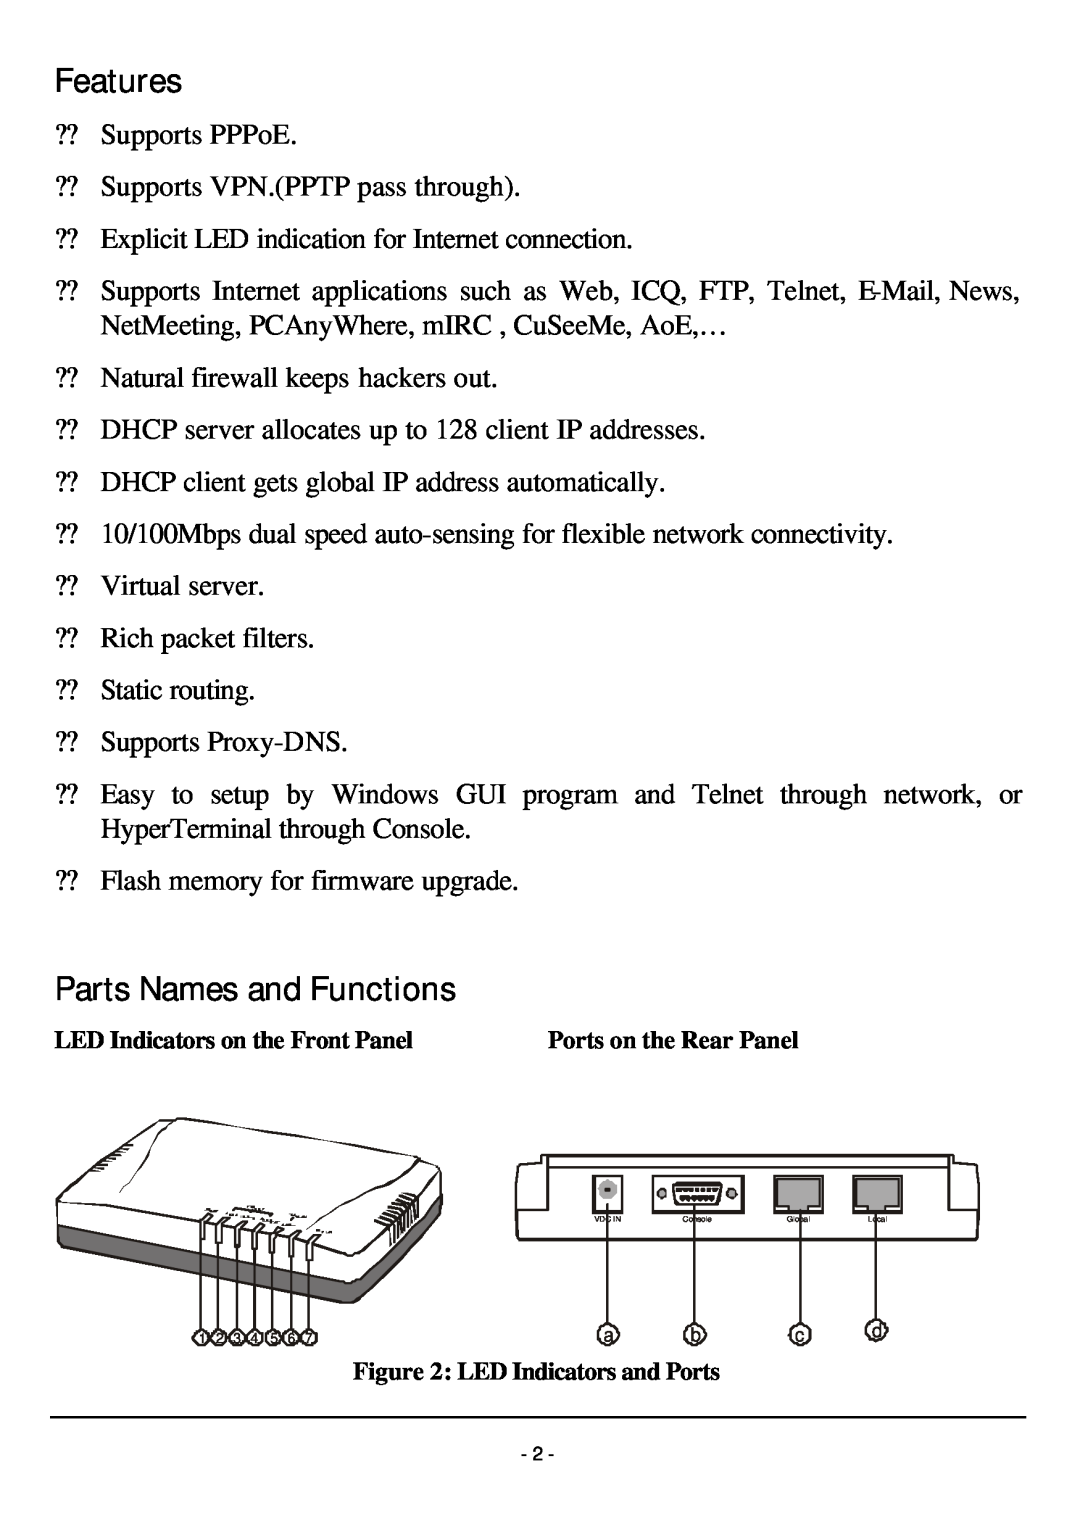 TRENDnet TW100-W1CA user manual Features, Parts Names and Functions 